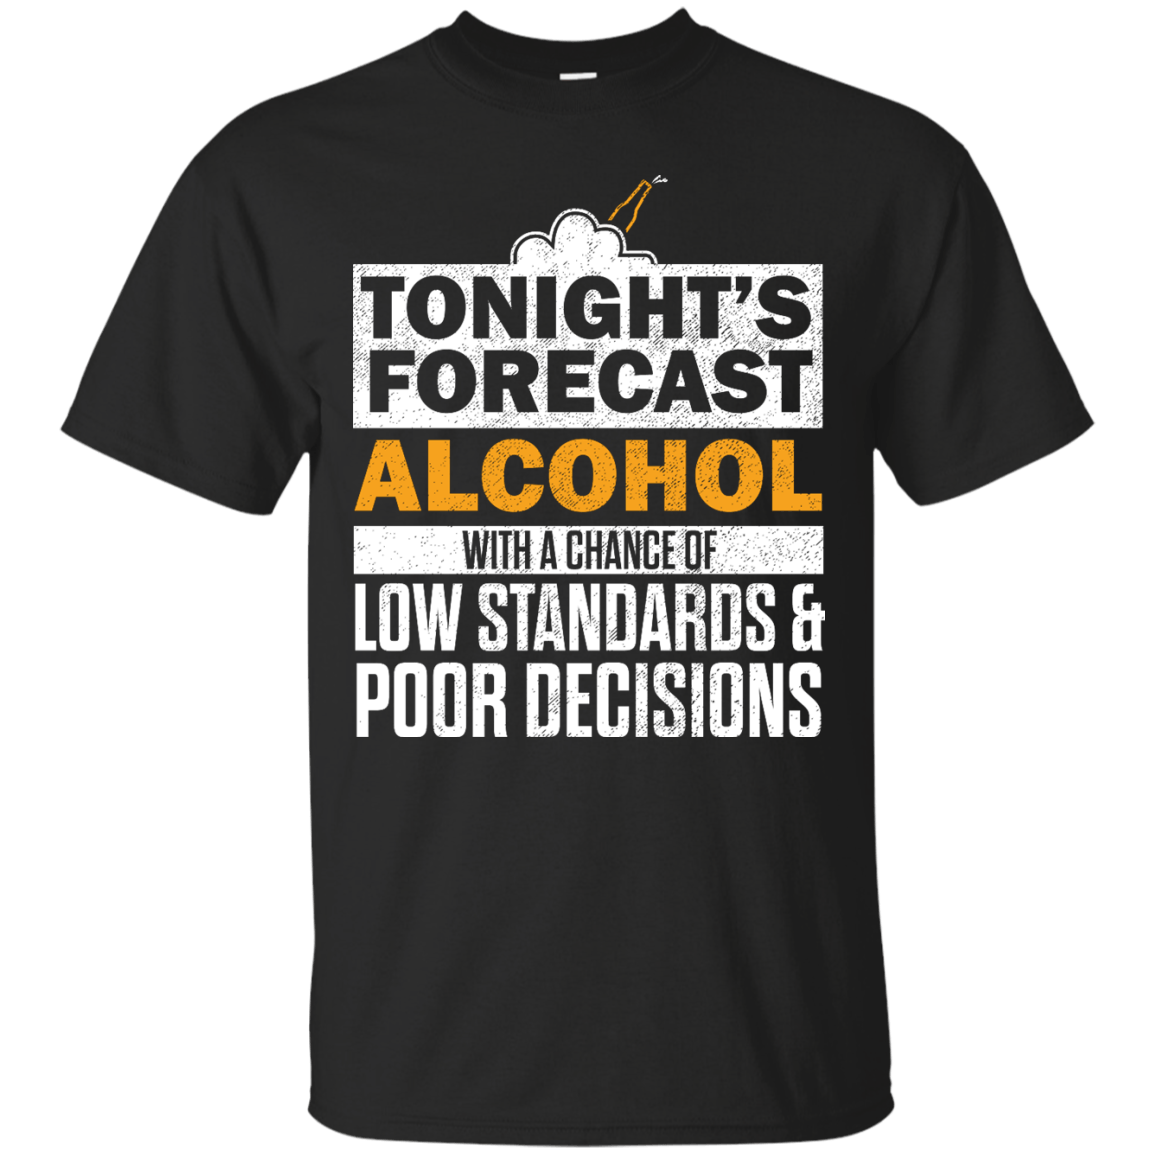 Tonight's Forecast Alcohol T-Shirt Apparel - The Beer Lodge